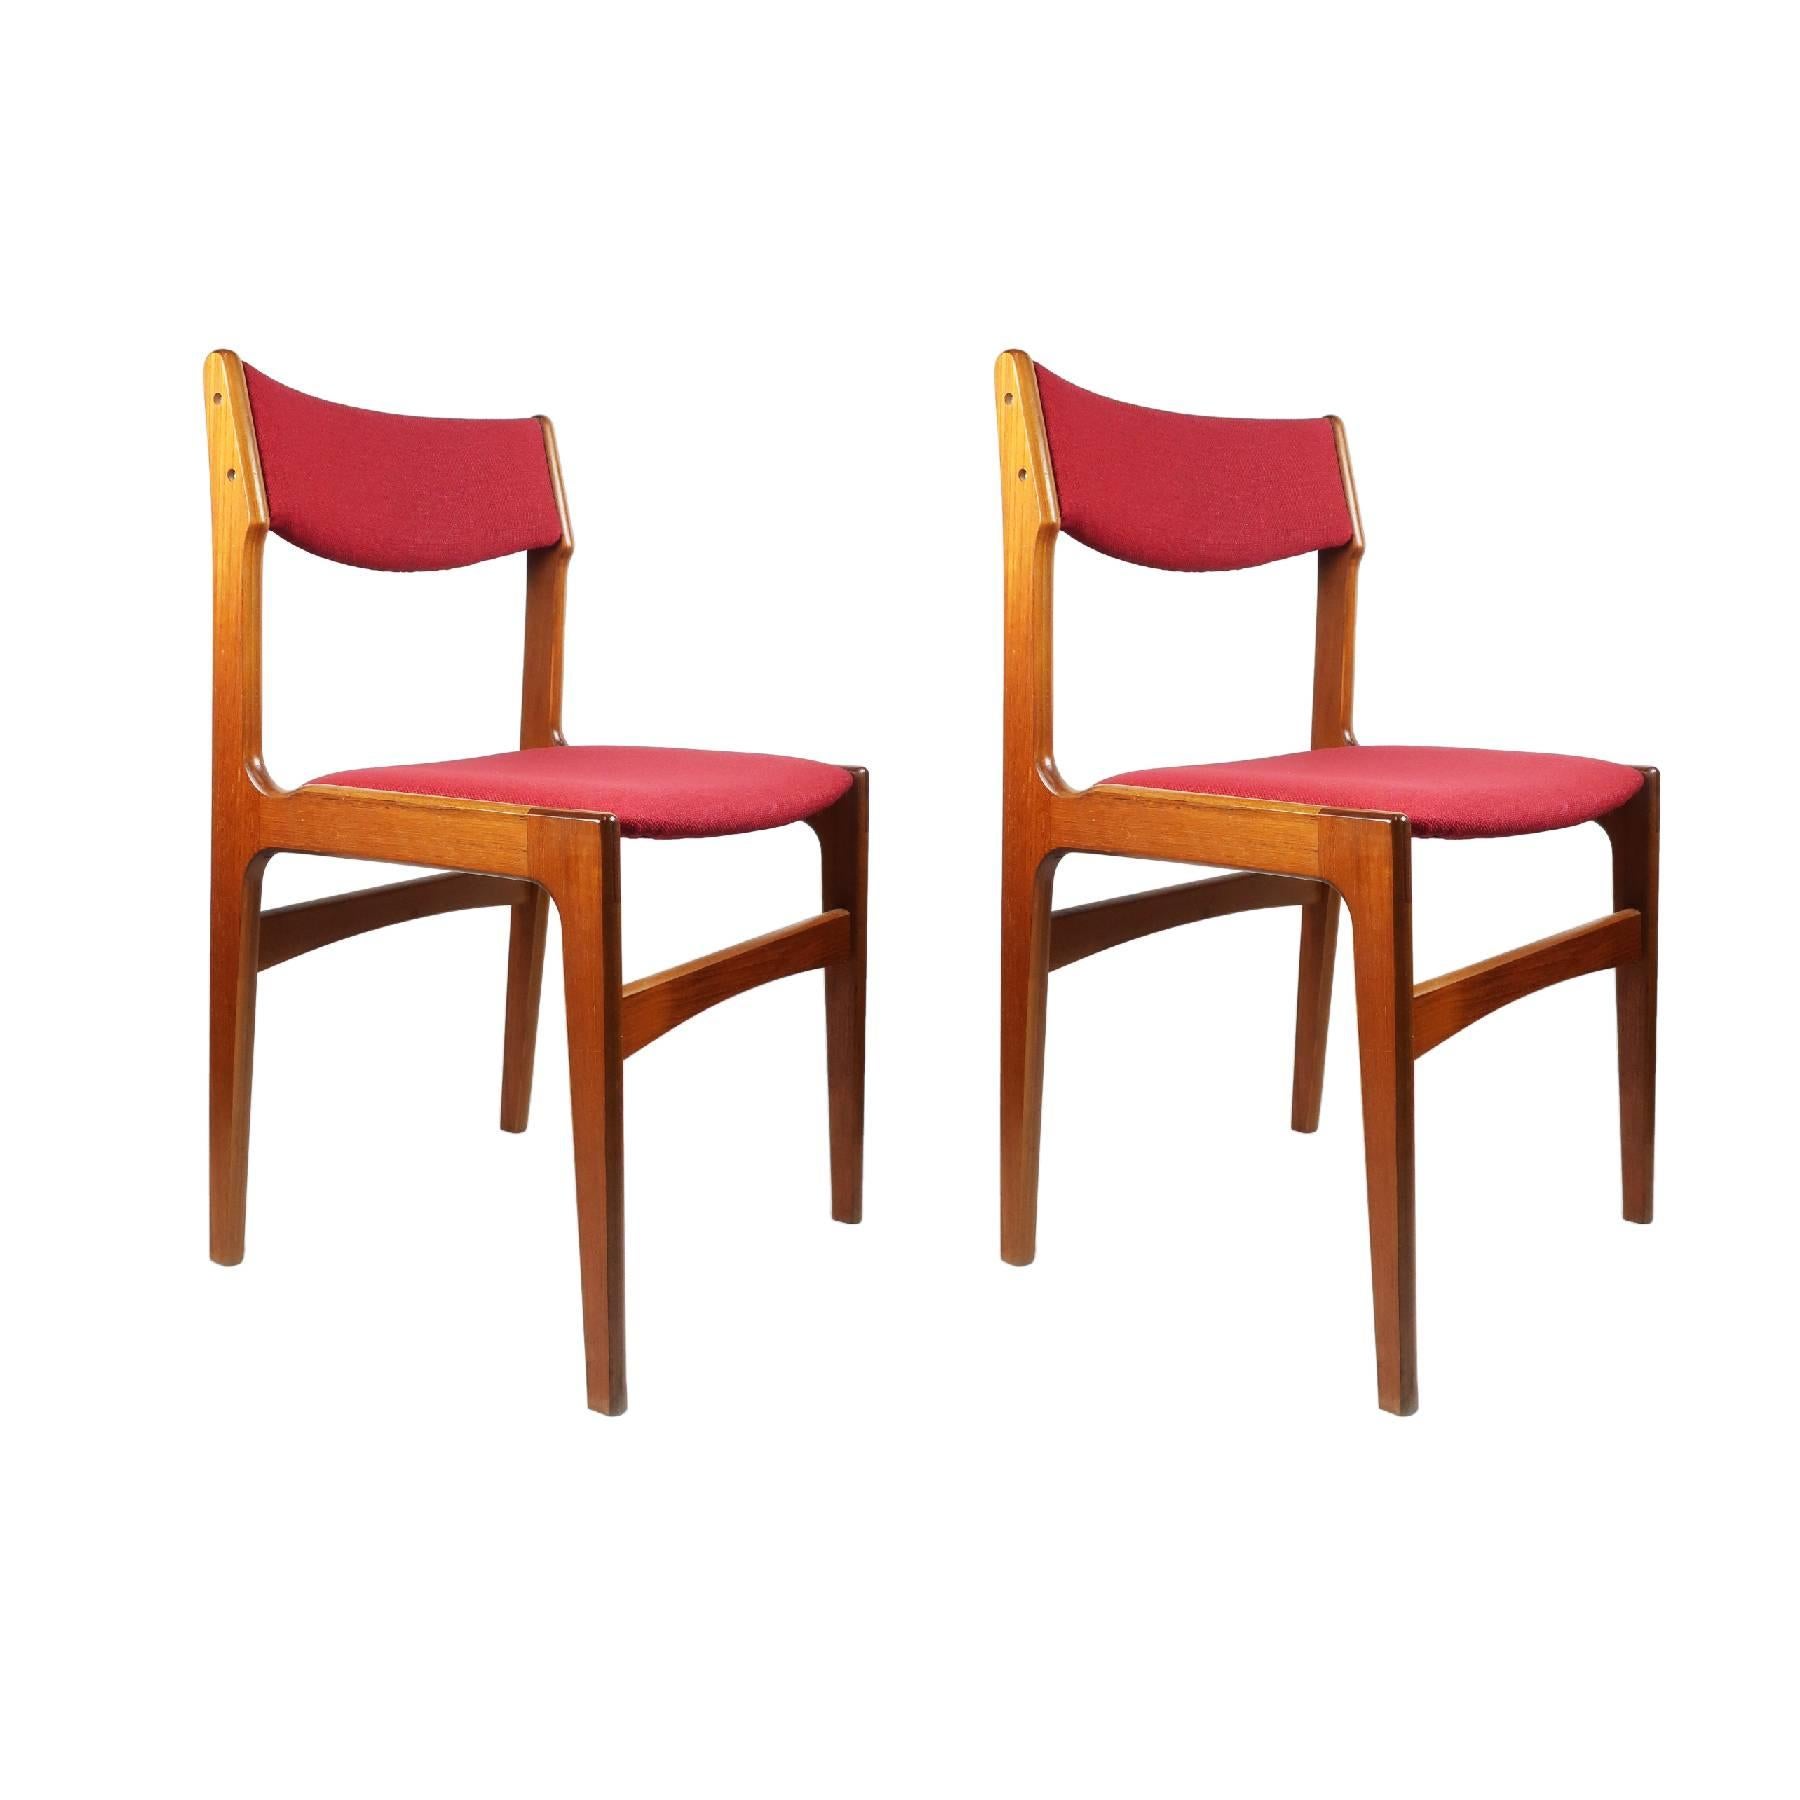 Pair of Danish Modern Dining Chairs by Erik Buch for Anderstrup Møbelfabrik